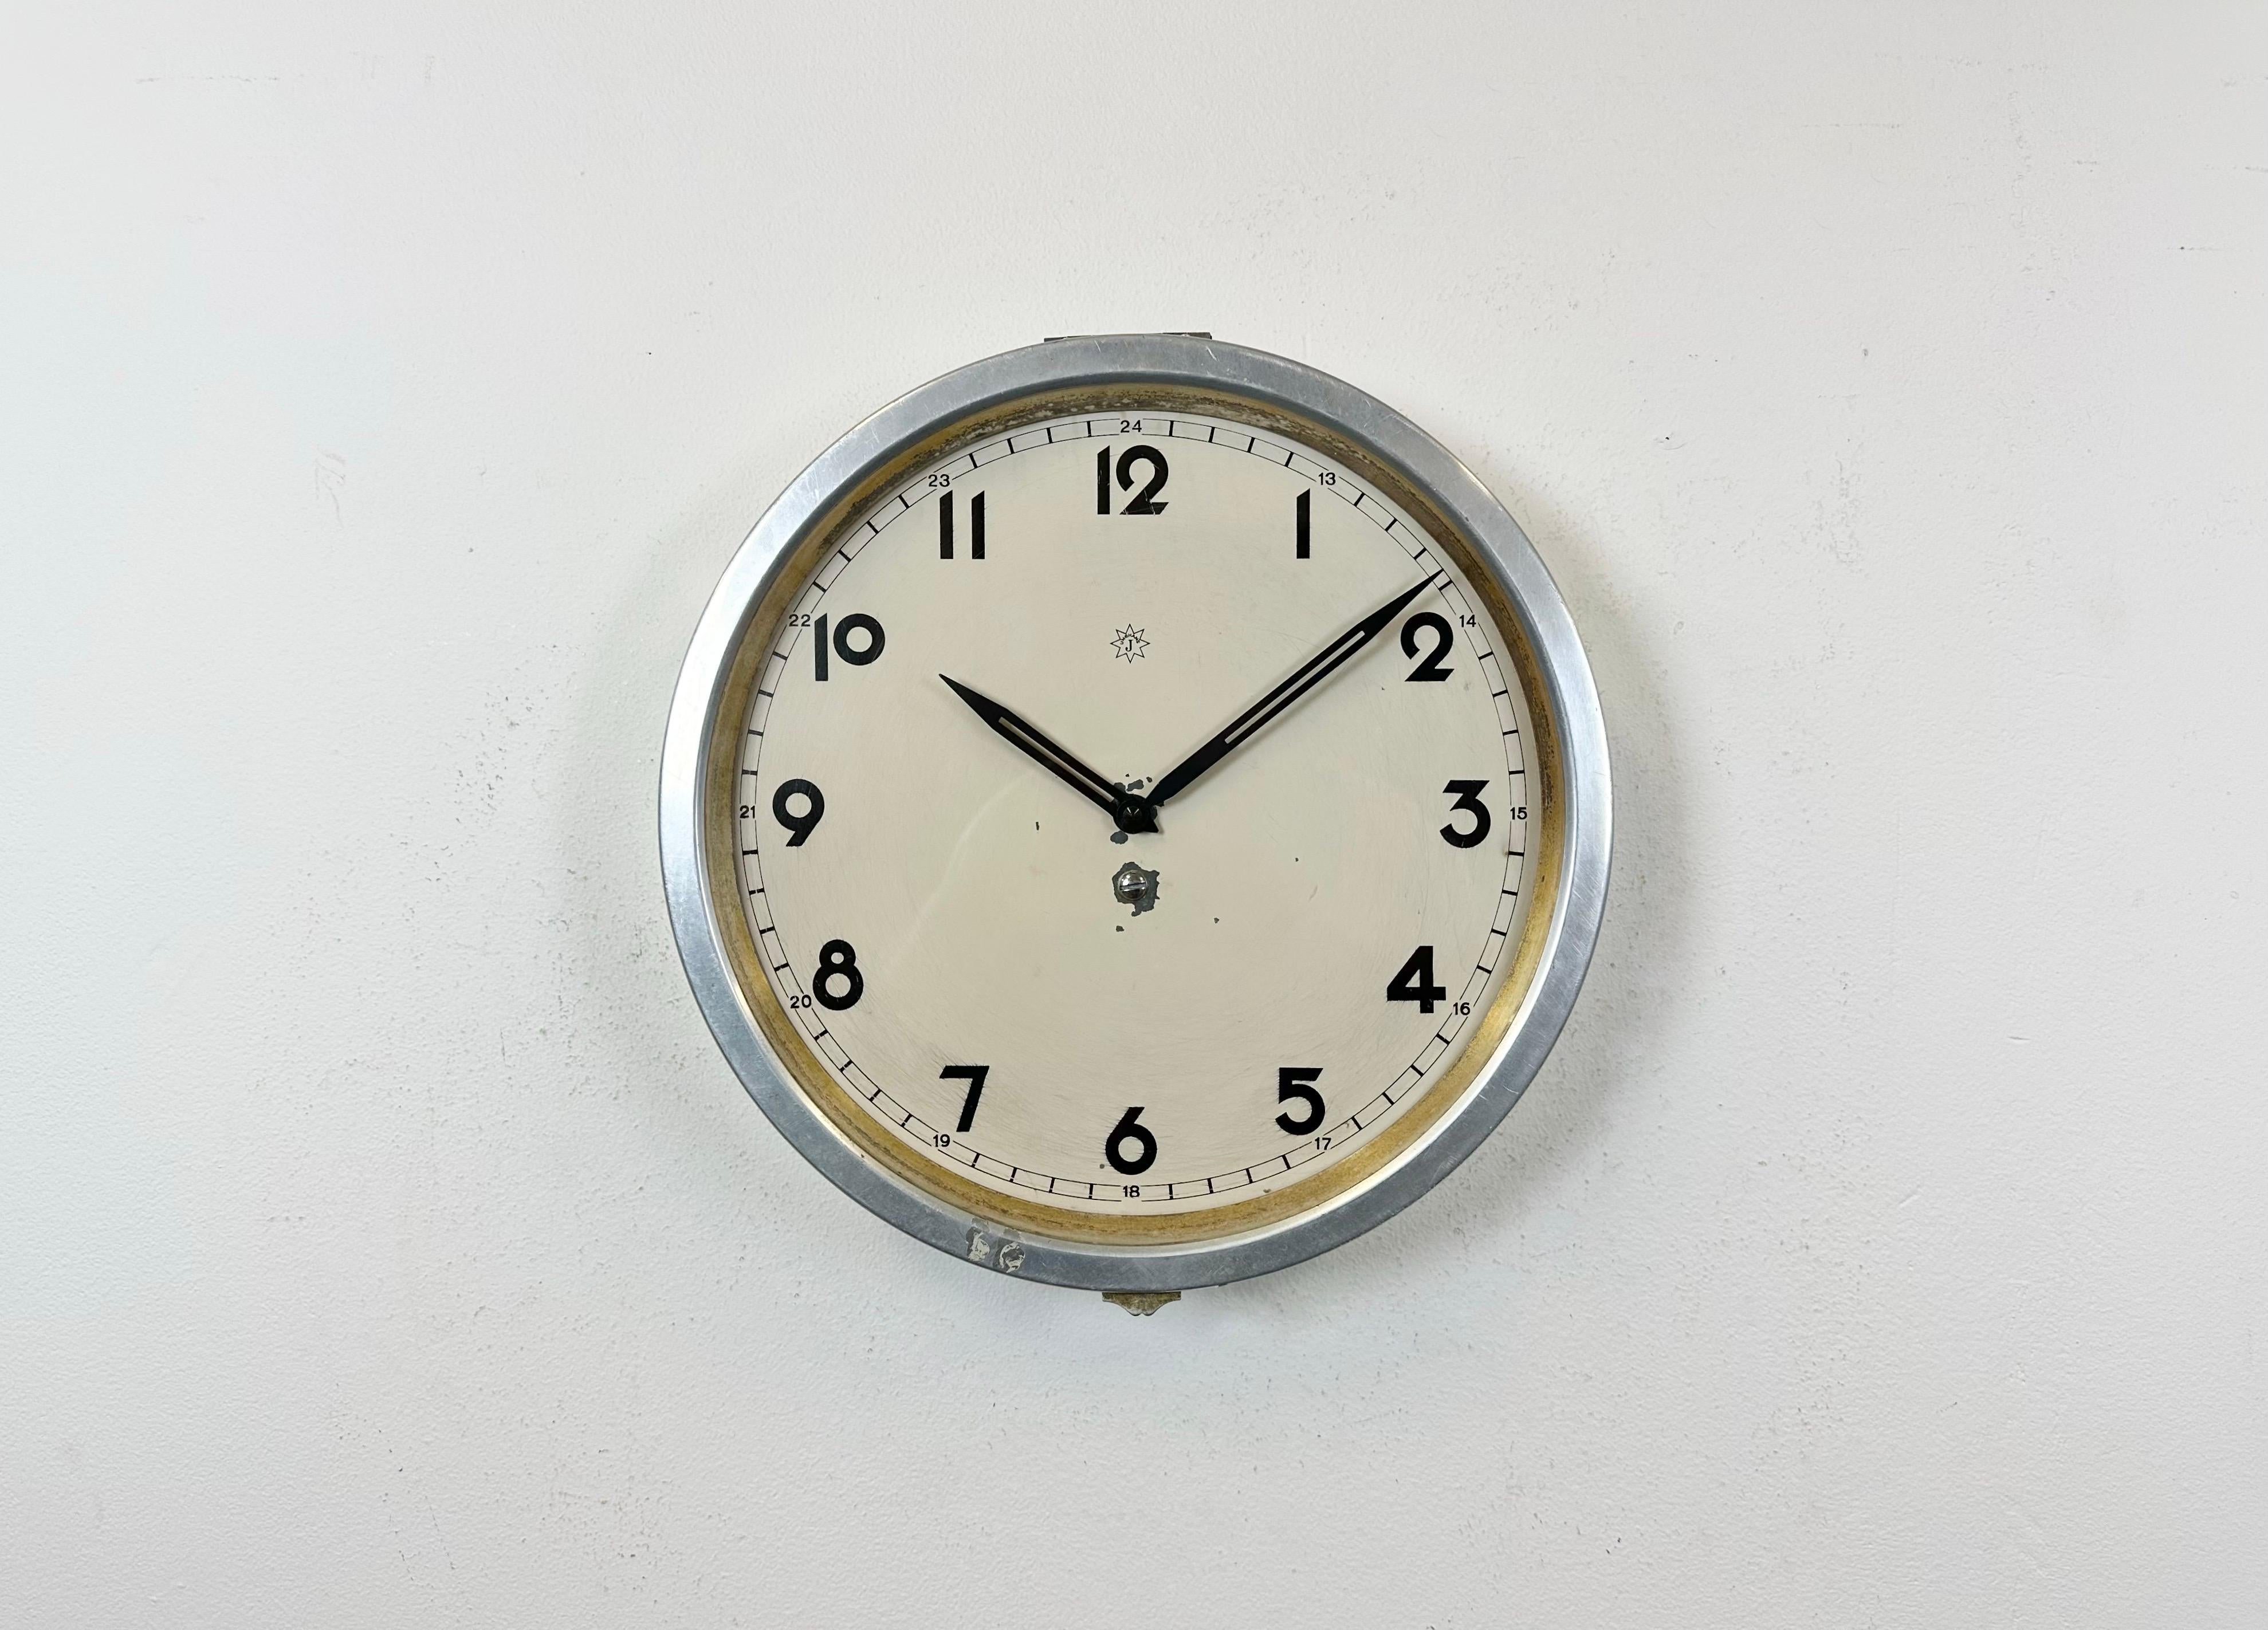 Vintage wall clock made by Junghans Uhren in Germany during the 1950s. It features an aluminium case and a clear glass cover. The piece has been converted into a battery-powered clockwork and requires only one AA-battery.
The diameter of the clock